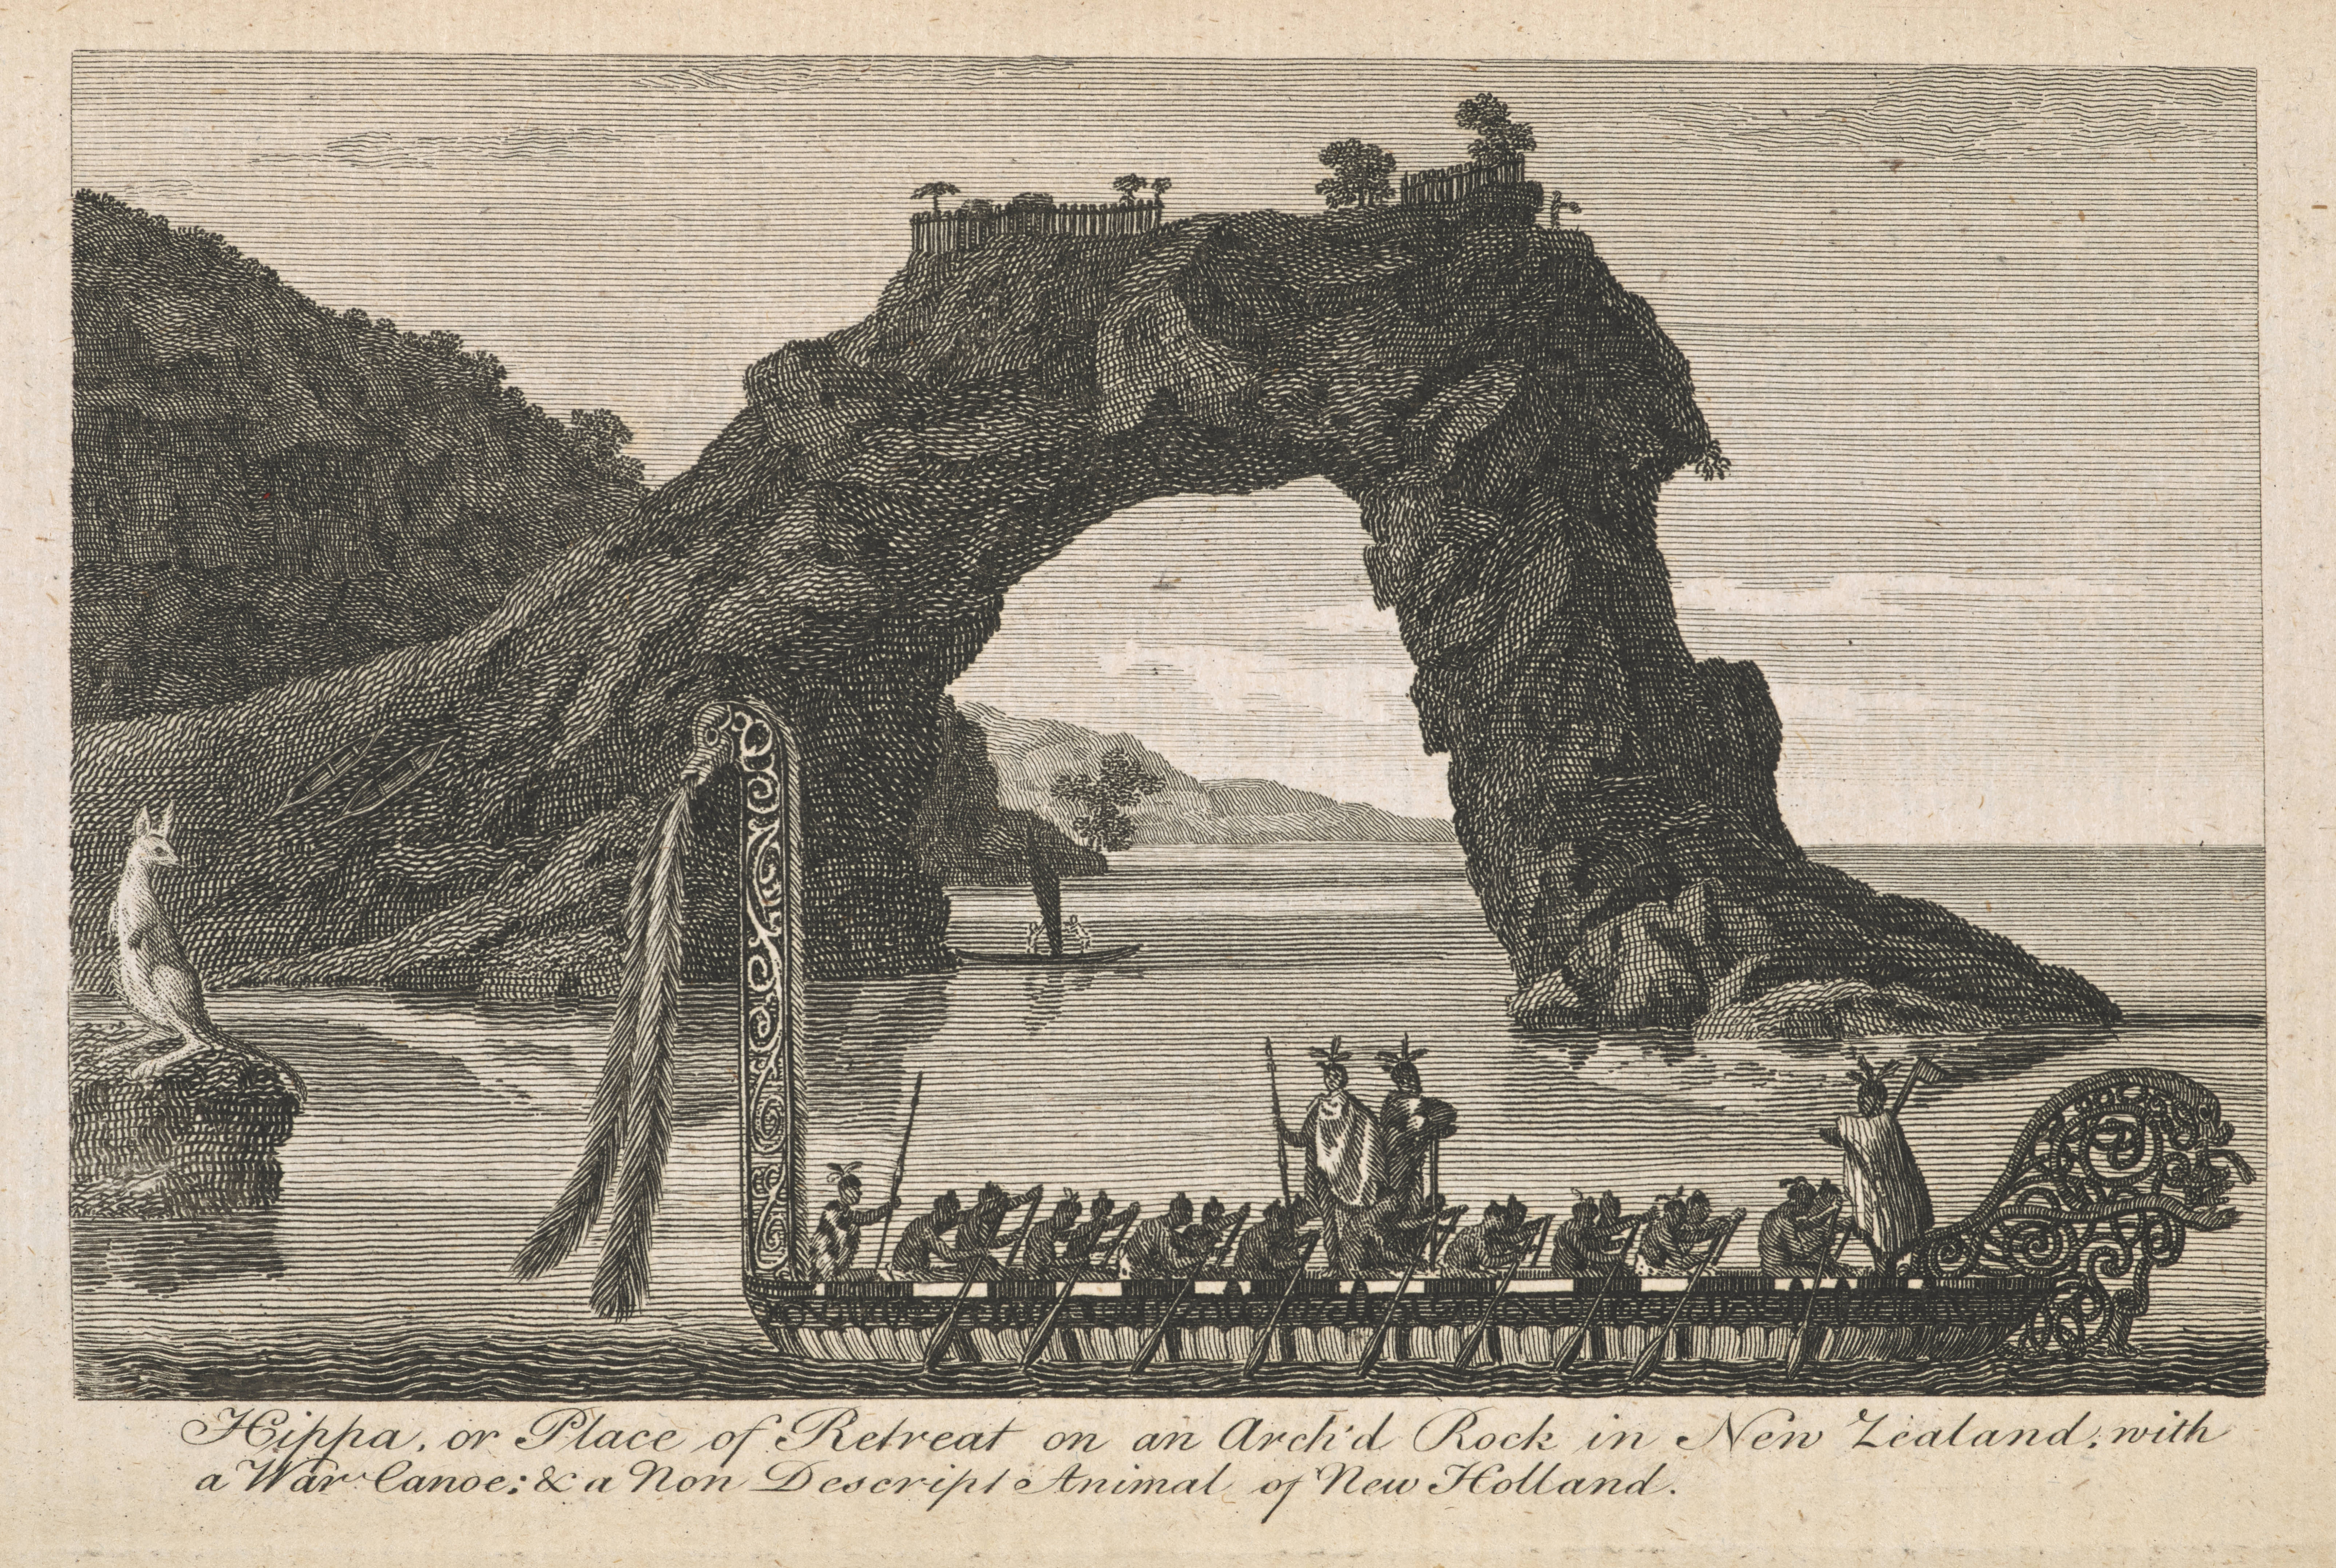 <i>with a War Canoe under a natural-arched Rock</i> from <i>The London Magazine</i>, 42, August 1773, facing p. 369, engraving, 9.5 x 15.4 cm. Collection The British Library (P.P. 5437).